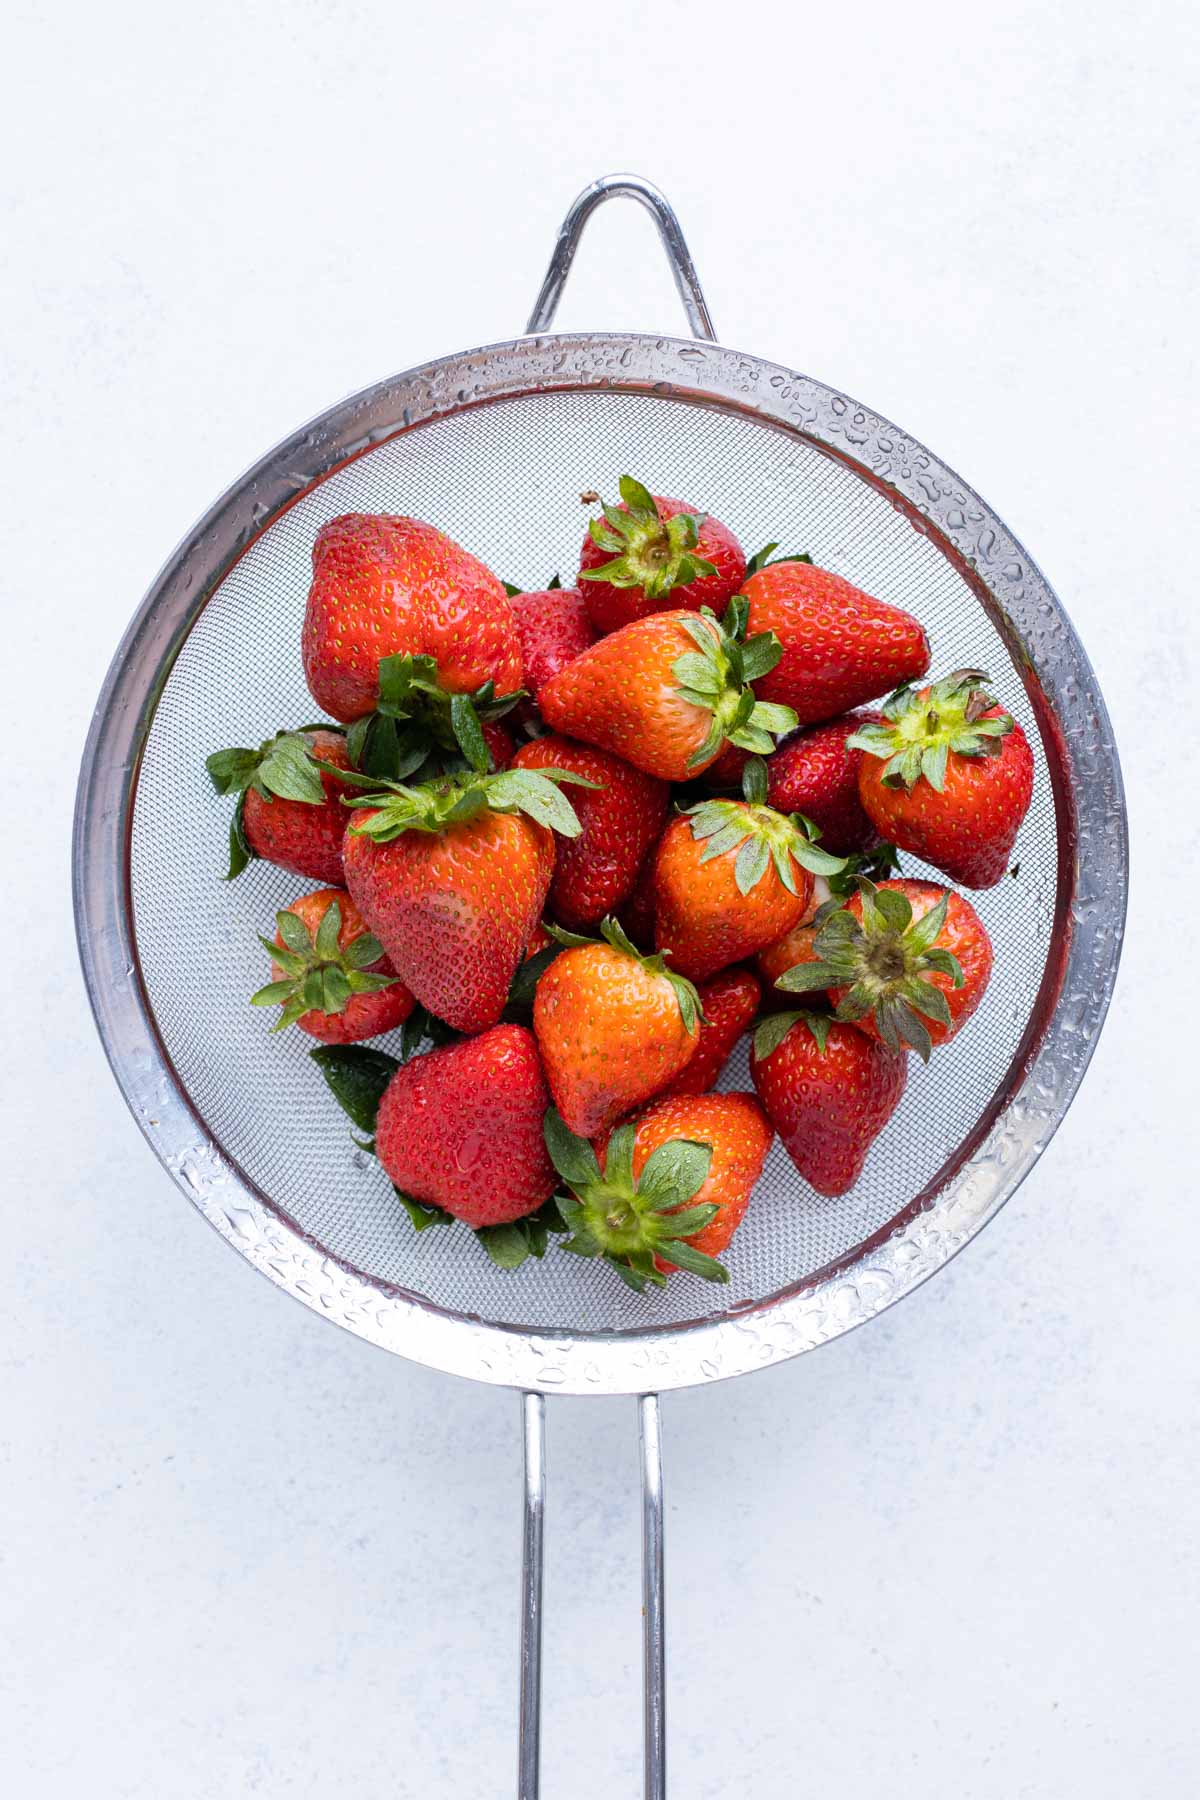 A strainer is used to wash and prepare the strawberries.